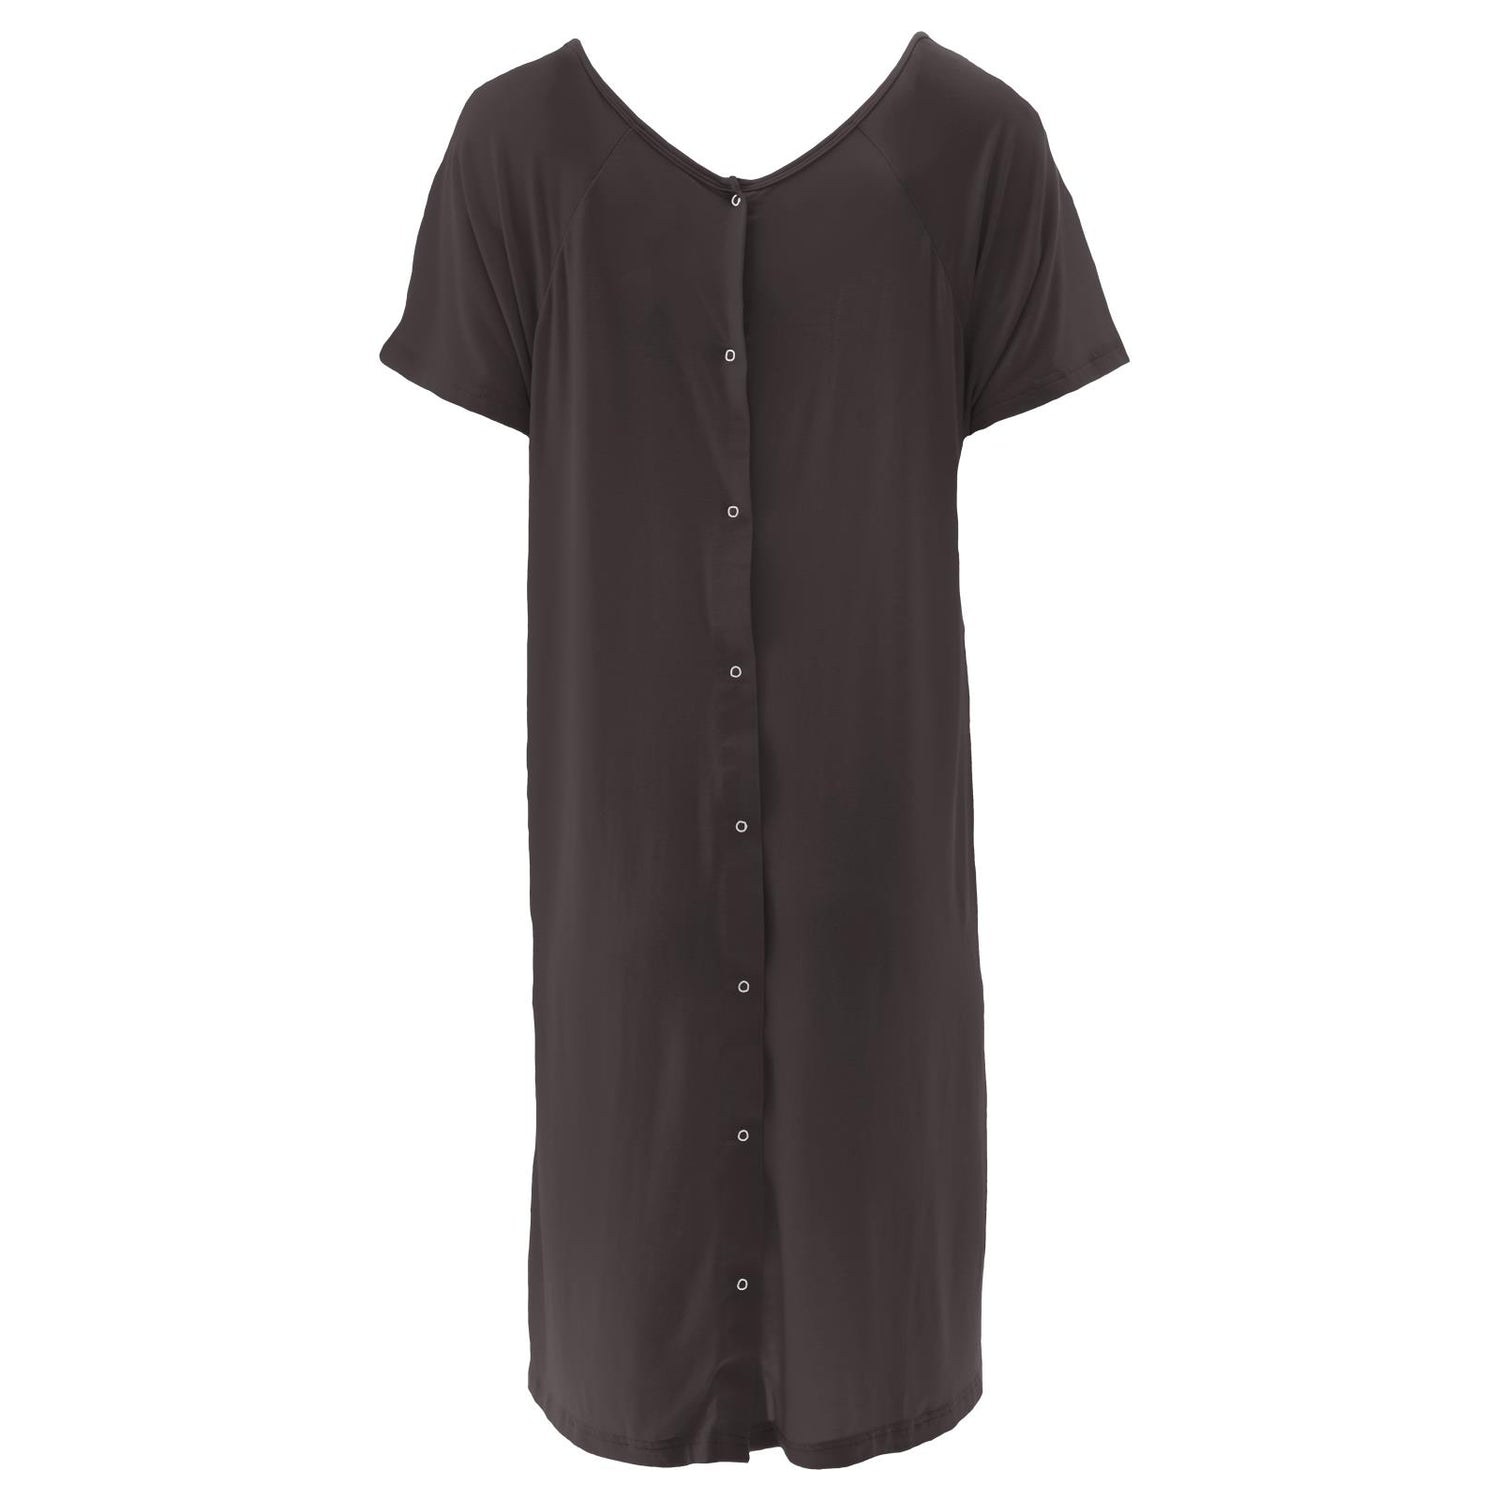 Women's Hospital Gown in Midnight